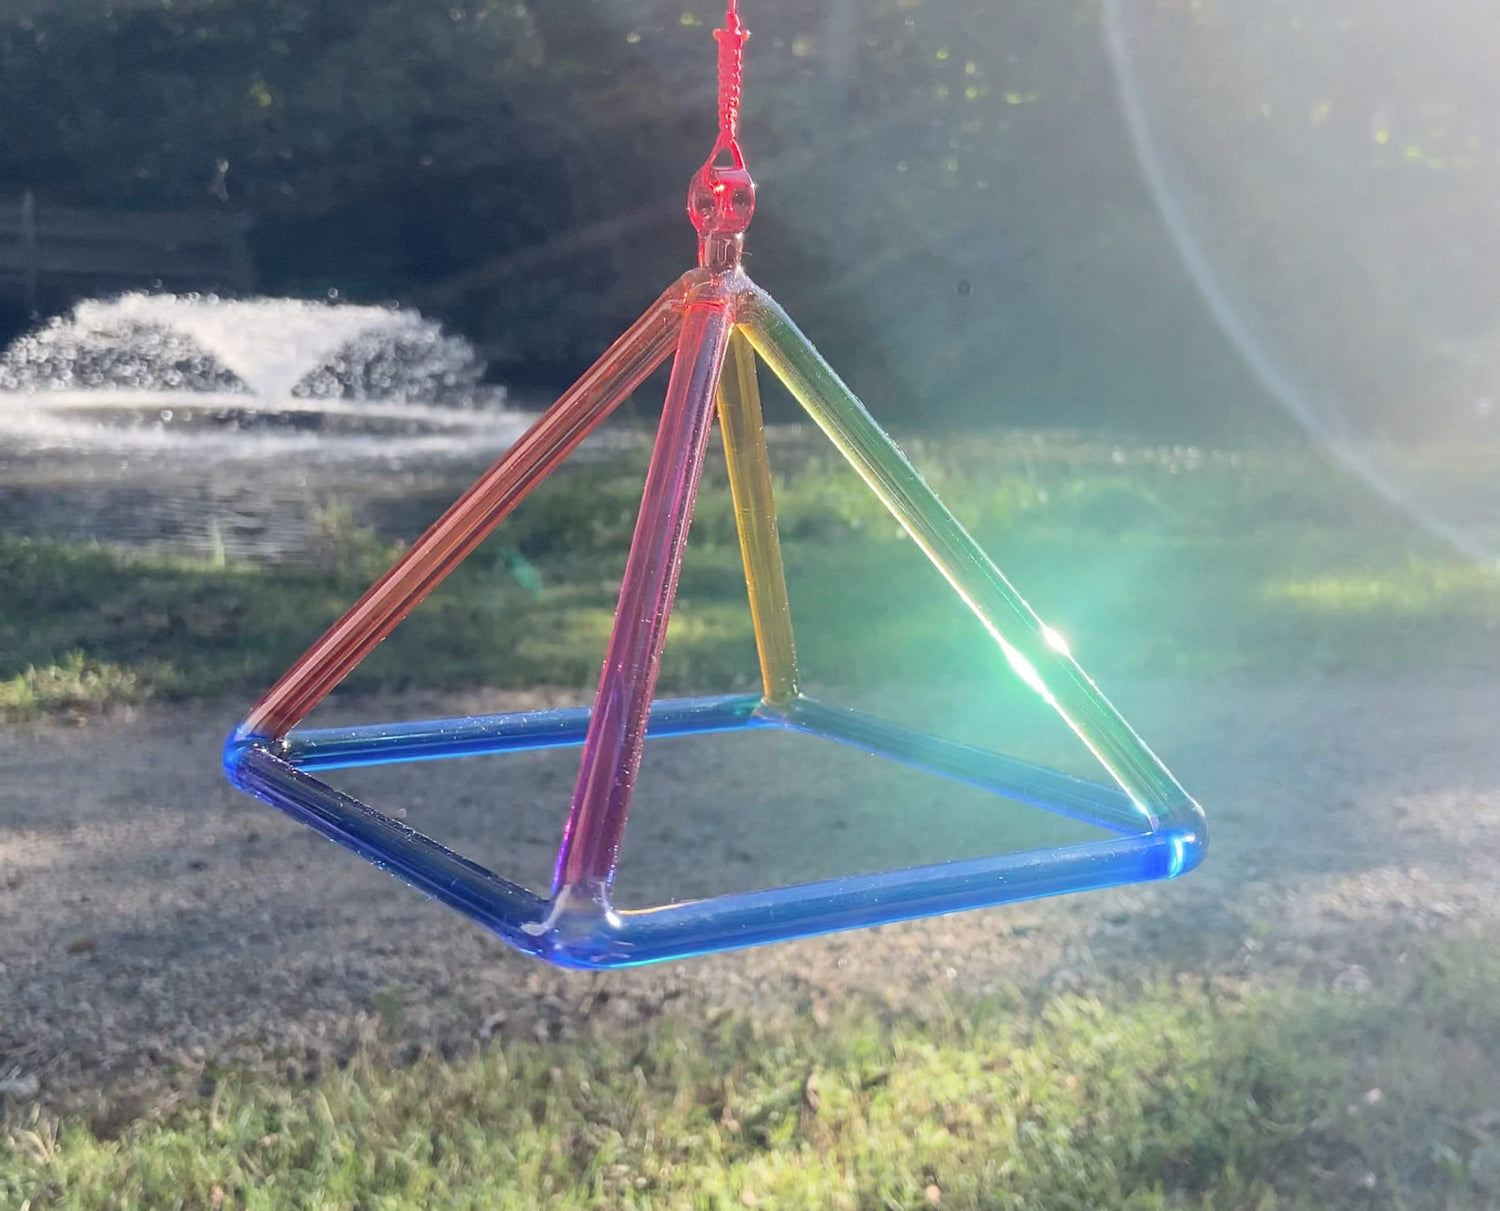 6” Rainbow Quartz Crystal Singing Pyramid Sound Vibration Musical Instrument With Crystal Striker And Padded Carry Case